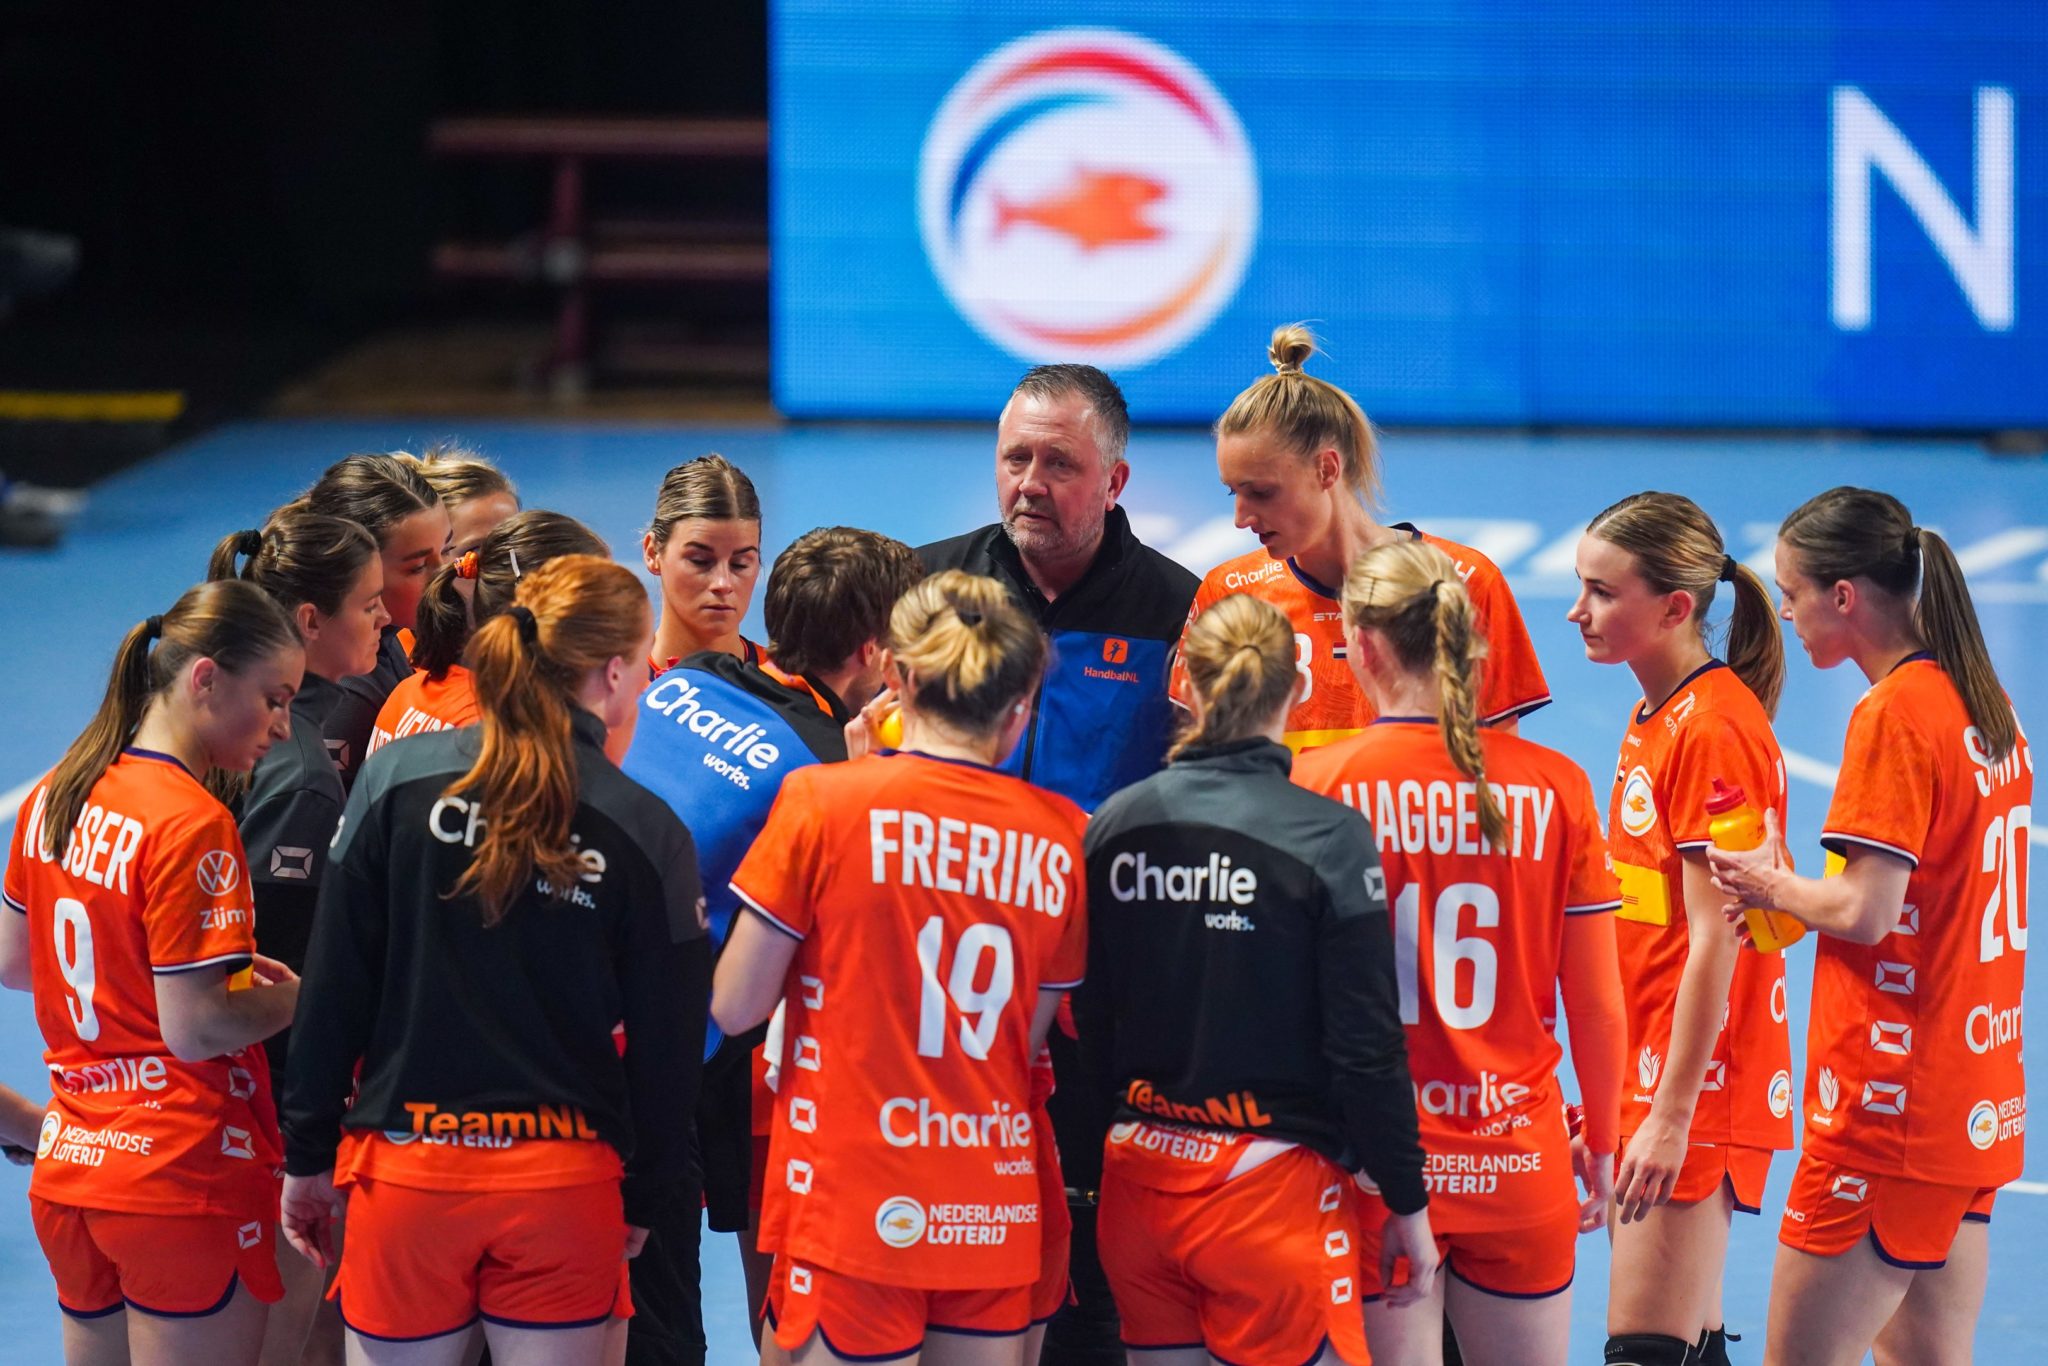 23-04-2022 HANDBAL:NEDERLAND-DUITSLAND:ALMERE
 Laura Van Der Heijden Of The Netherlands, Larissa Nusser Of The Netherlands, Bo Van Wetering Of The Netherlands, Tamara Haggerty Of The Netherlands, Kelly Dulfer Of The Netherlands, Merel Freriks Of The Netherlands, Inger Smits Of The Netherlands, Angela Malestein Of The Netherlands, Nikita Van Der Vliet Of The Netherlands, Kim Molenaar Of The Netherlands, Kelly Vollebregt Of The Netherlands, Tess Wester Of The Netherlands, Yara Ten Holte Of The Netherlands, Tessa Van Zijl Of The Netherlands, Harma Van Kreij Of The Netherlands, Dione Housheer Of The Netherlands And Coach Per Johansson Of The Netherlands During The EHF EURO 2022 Qualifiers Phase 2 Match Between Netherlands And Germany At The Topsportcentrum Almere On April 23, 2022 In Almere, Netherlands (Photo By Henk Seppen)
*** Local Caption *** Laura Van Der Heijden, Larissa Nusser, Bo Van Wetering, Tamara Haggerty, Kelly Dulfer, Inger Smits, Angela Malestein, Nikita Van Der Vliet, Kim Molenaar, Nn31/, Tess Wester, Yara Ten Holte, Tessa Van Zijl, Harma Van Kreij, Dione Housheer, Per Johansson